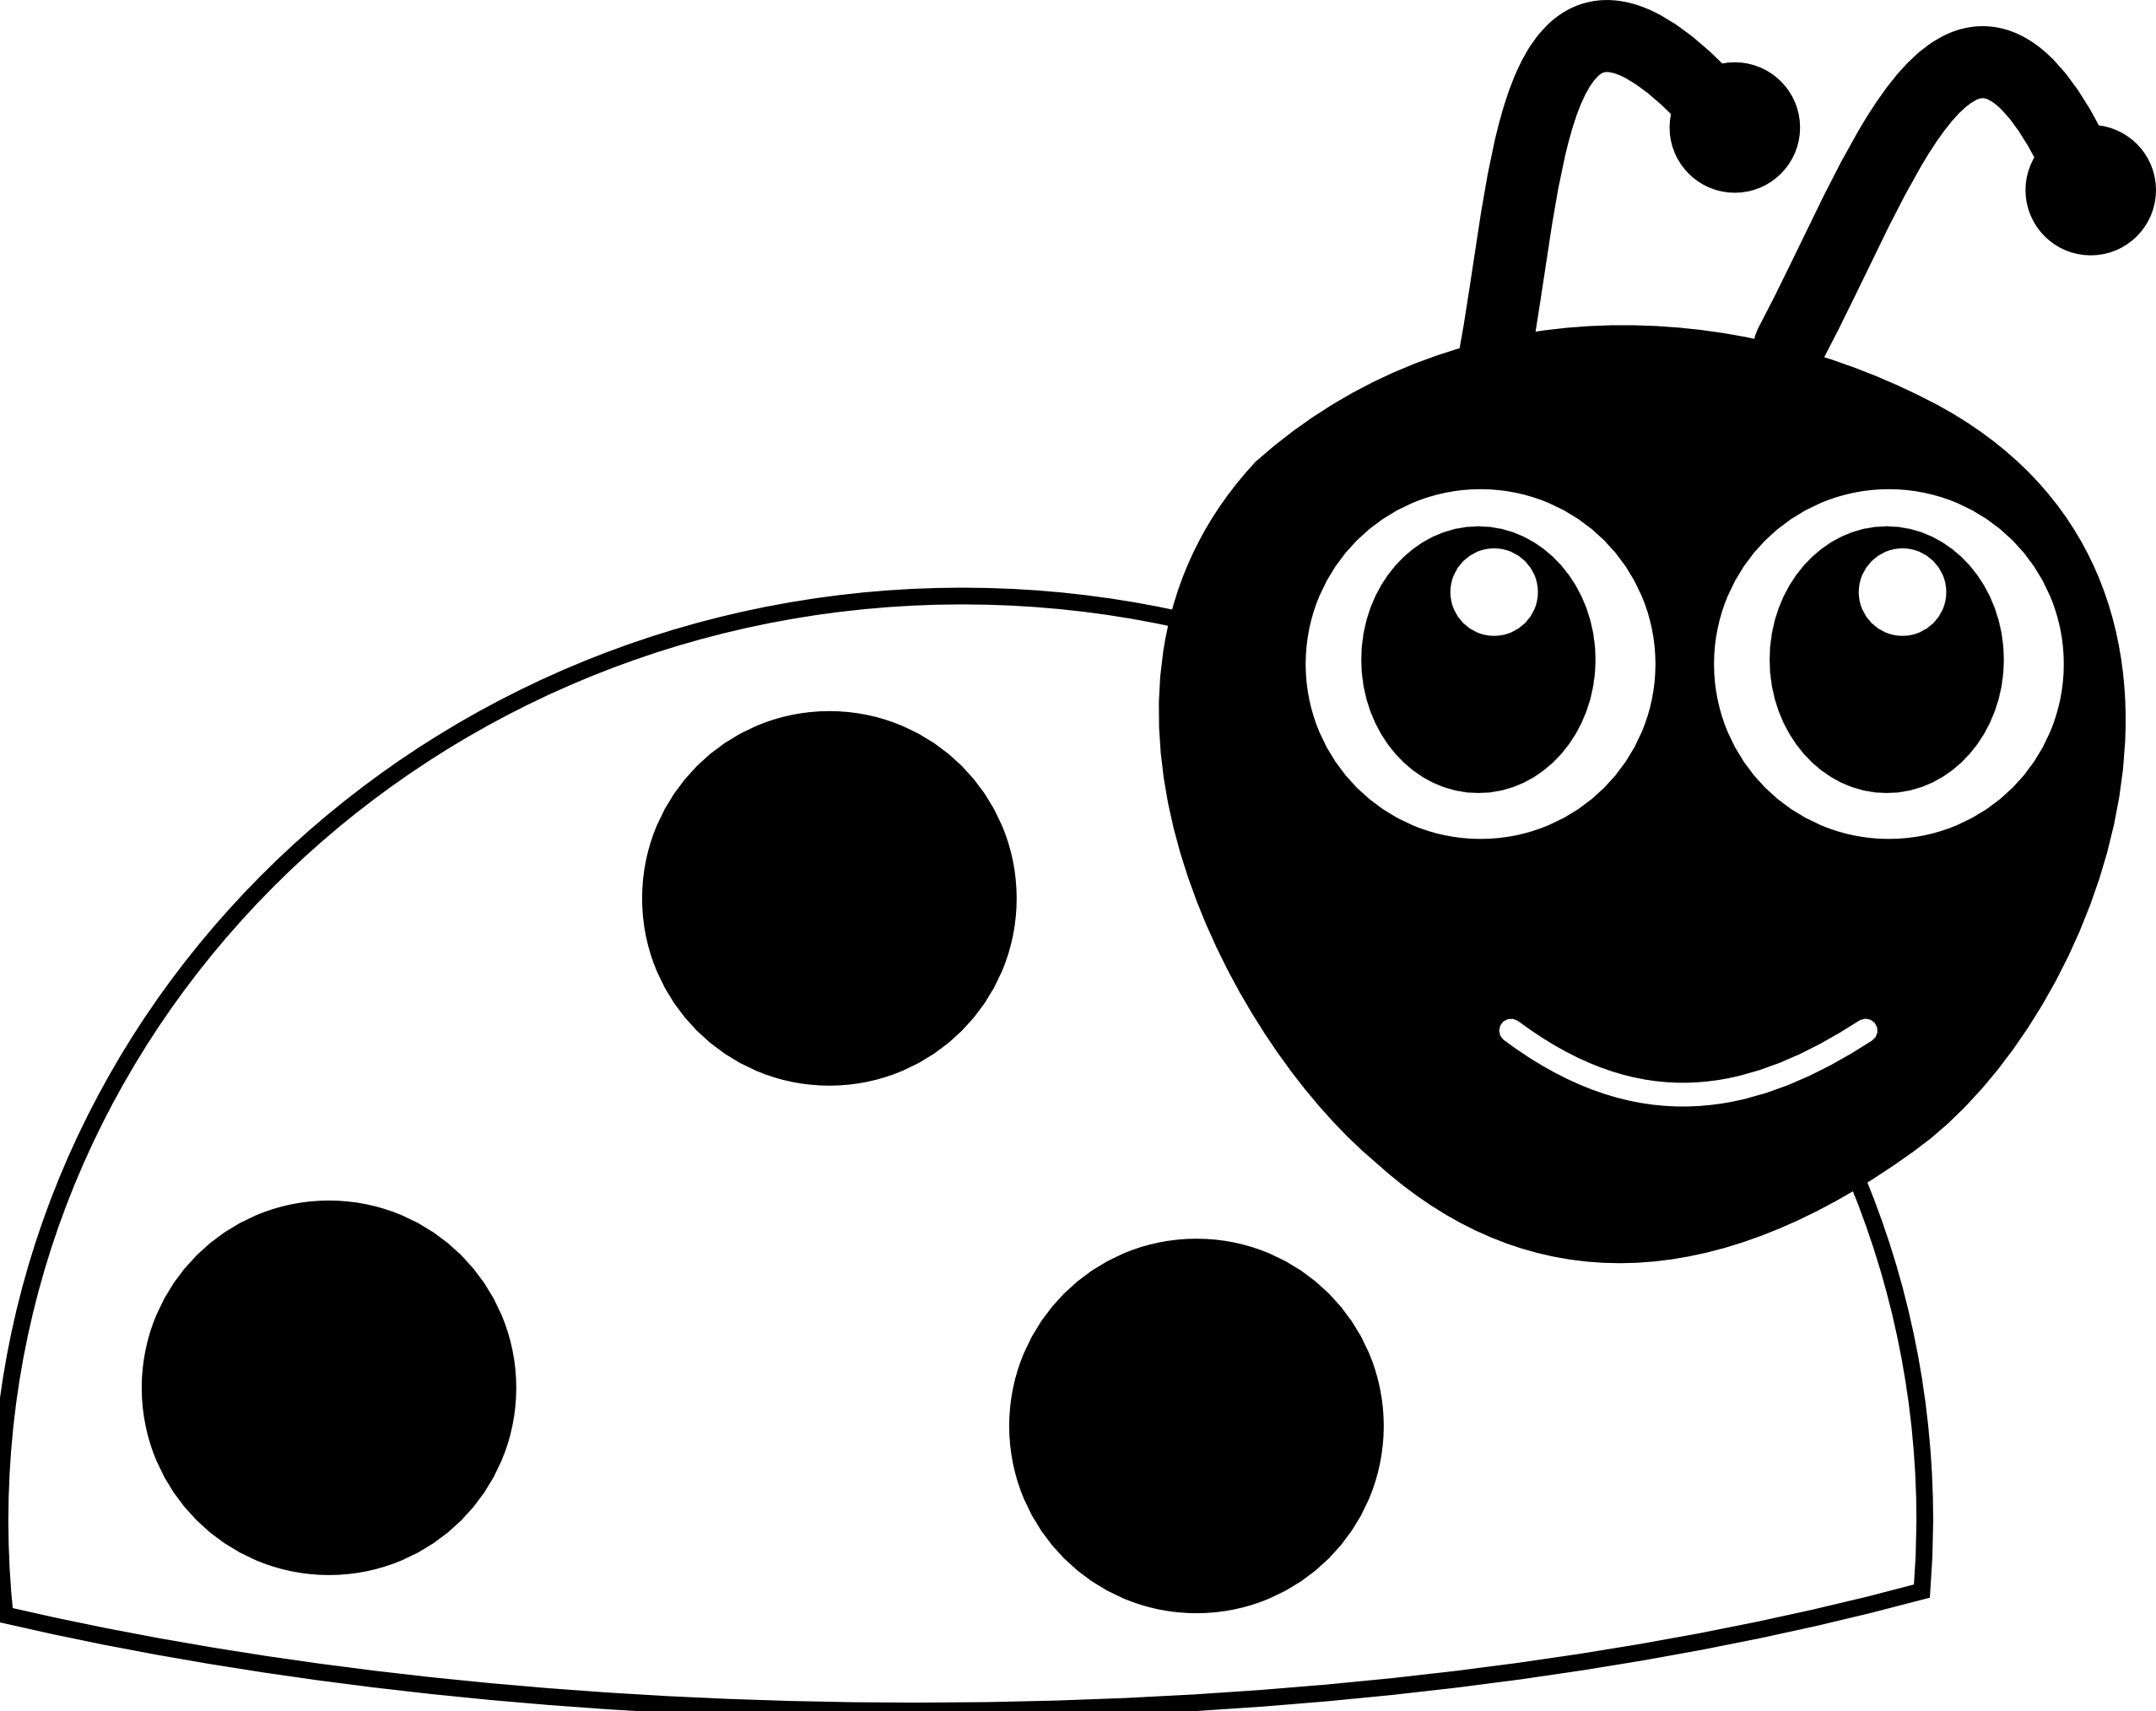 Lady Bug Clip Art - Clipart library